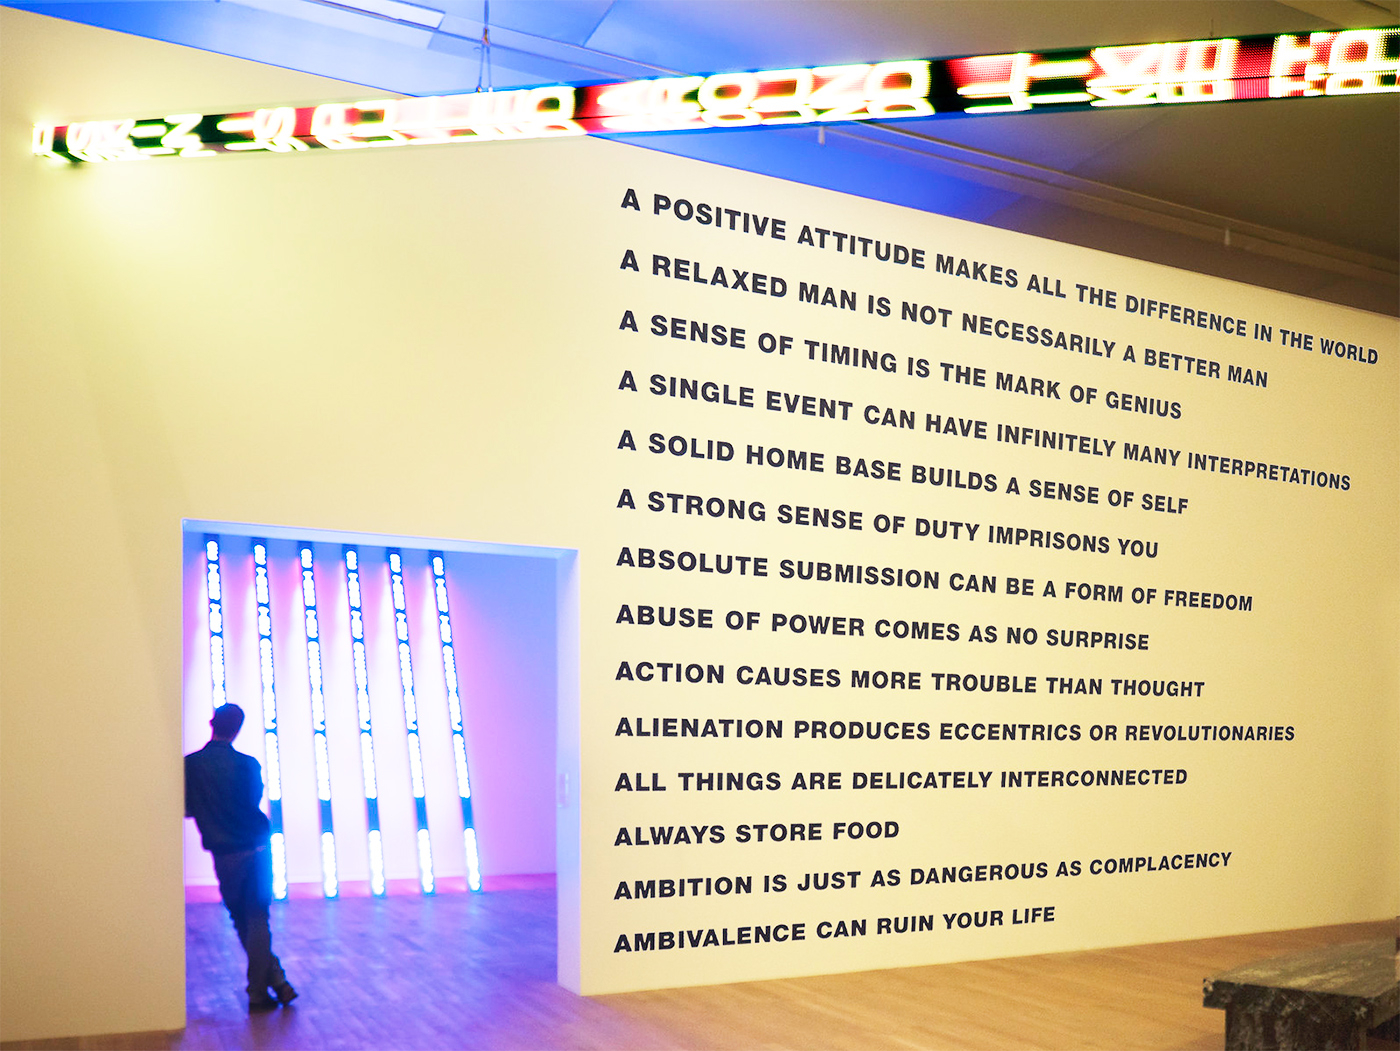 Jenny Holzer's ongoing 'Truisms' series initially appeared on anonymous posters throughout lower Manhattan in New York in the late 1970s. Seen here installed in the ARTIST ROOMS at Tate Modern, London, 2018.Exhibition View: ARTIST ROOMS: Jenny Holzer at Tate Modern, London, 2018.